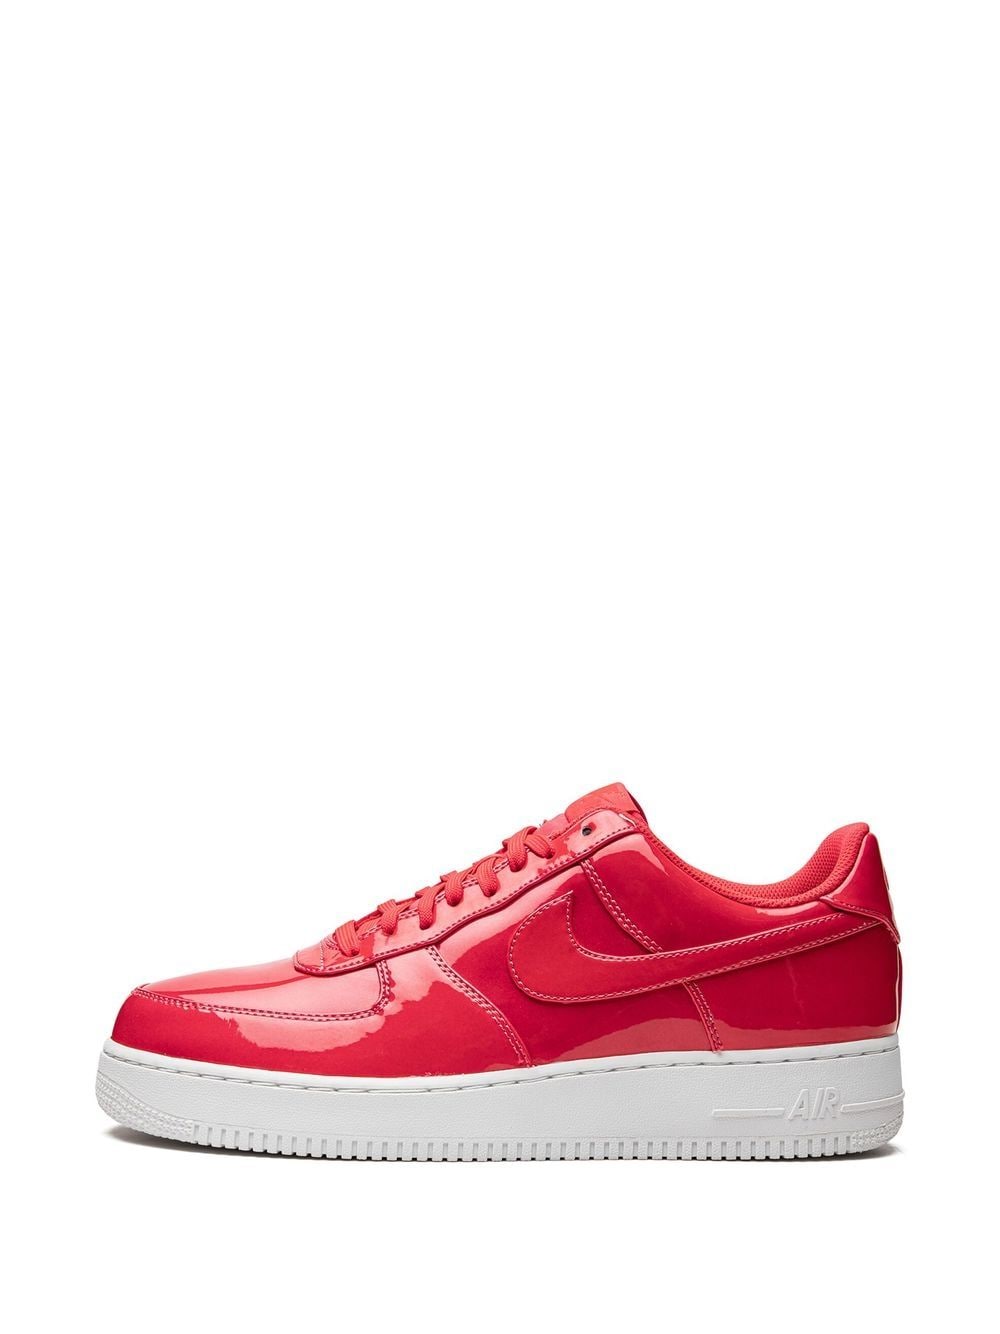 Nike Air Force 1 '07 LV8 UV Siren Red Sneakers - Farfetch